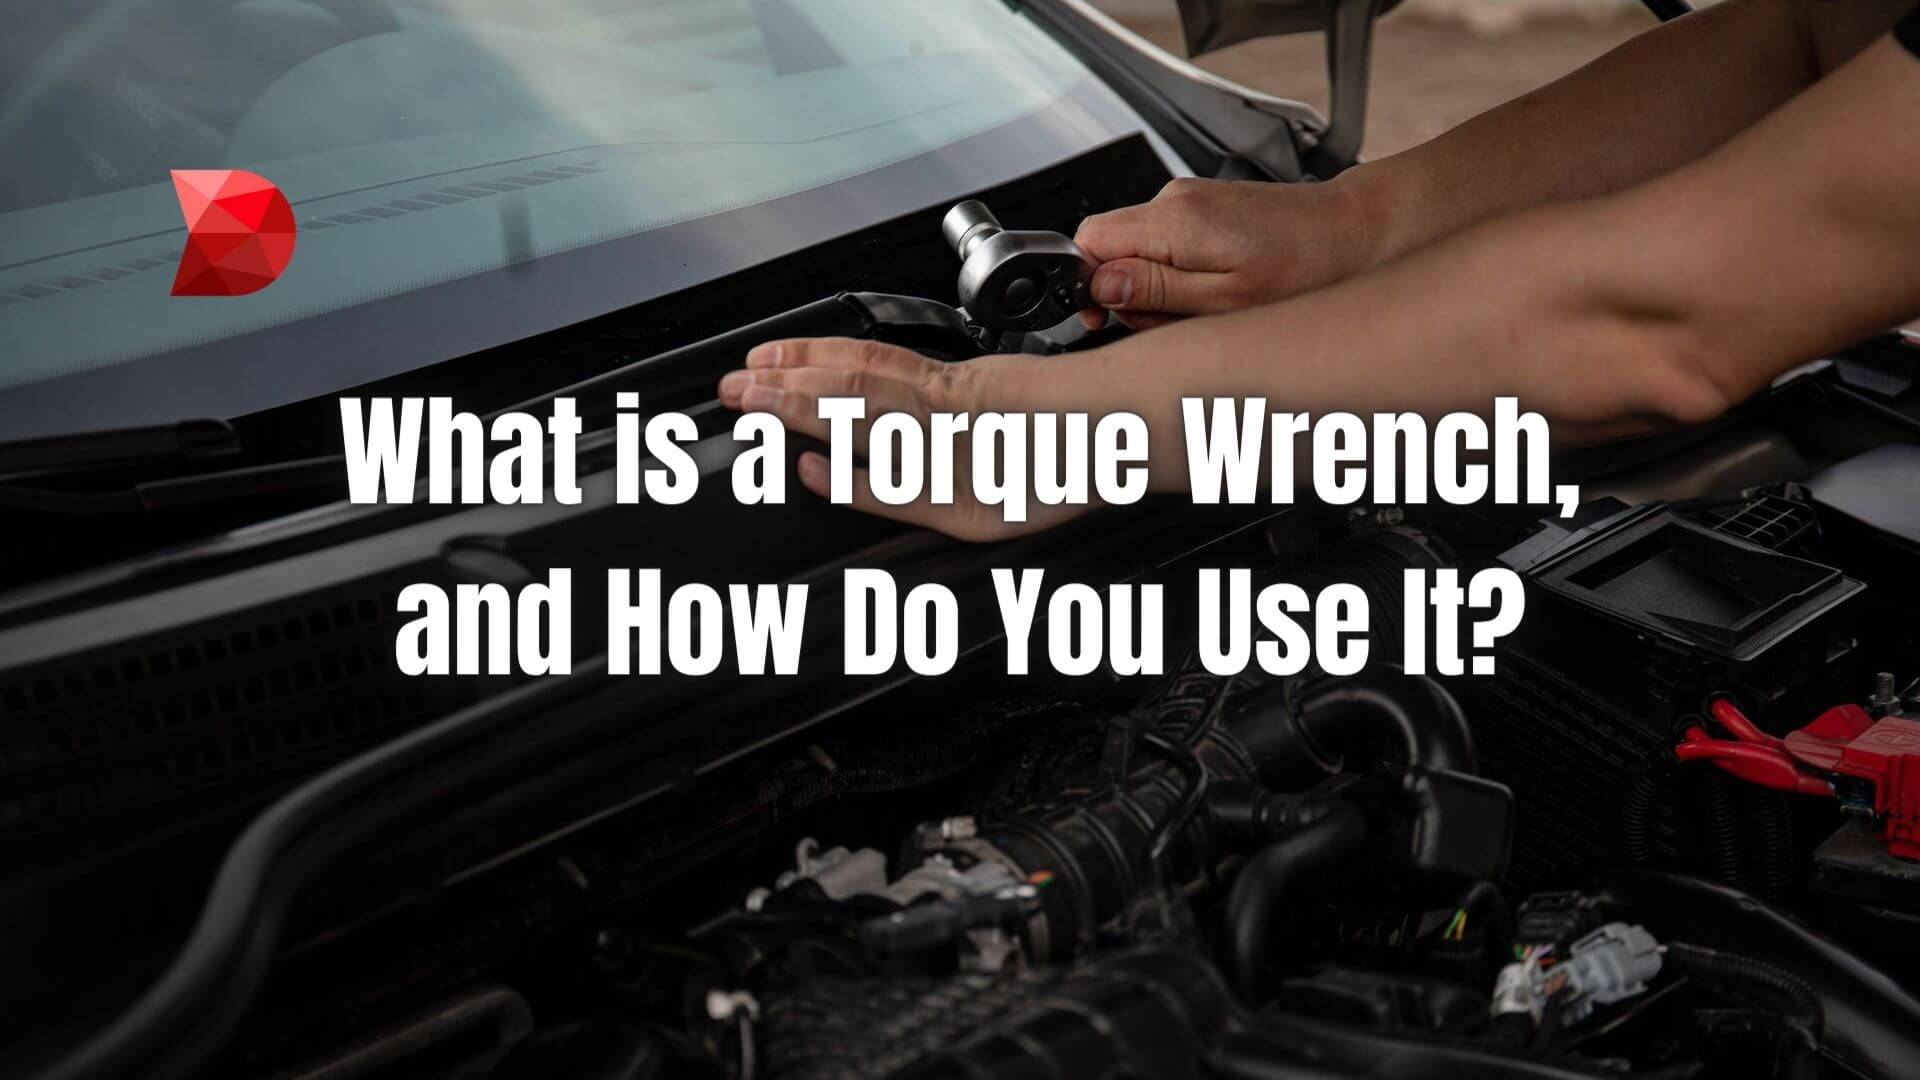 Explore torque wrench mastery in our guide! Click here to discover what a torque wrench is and gain insights into proper usage techniques.